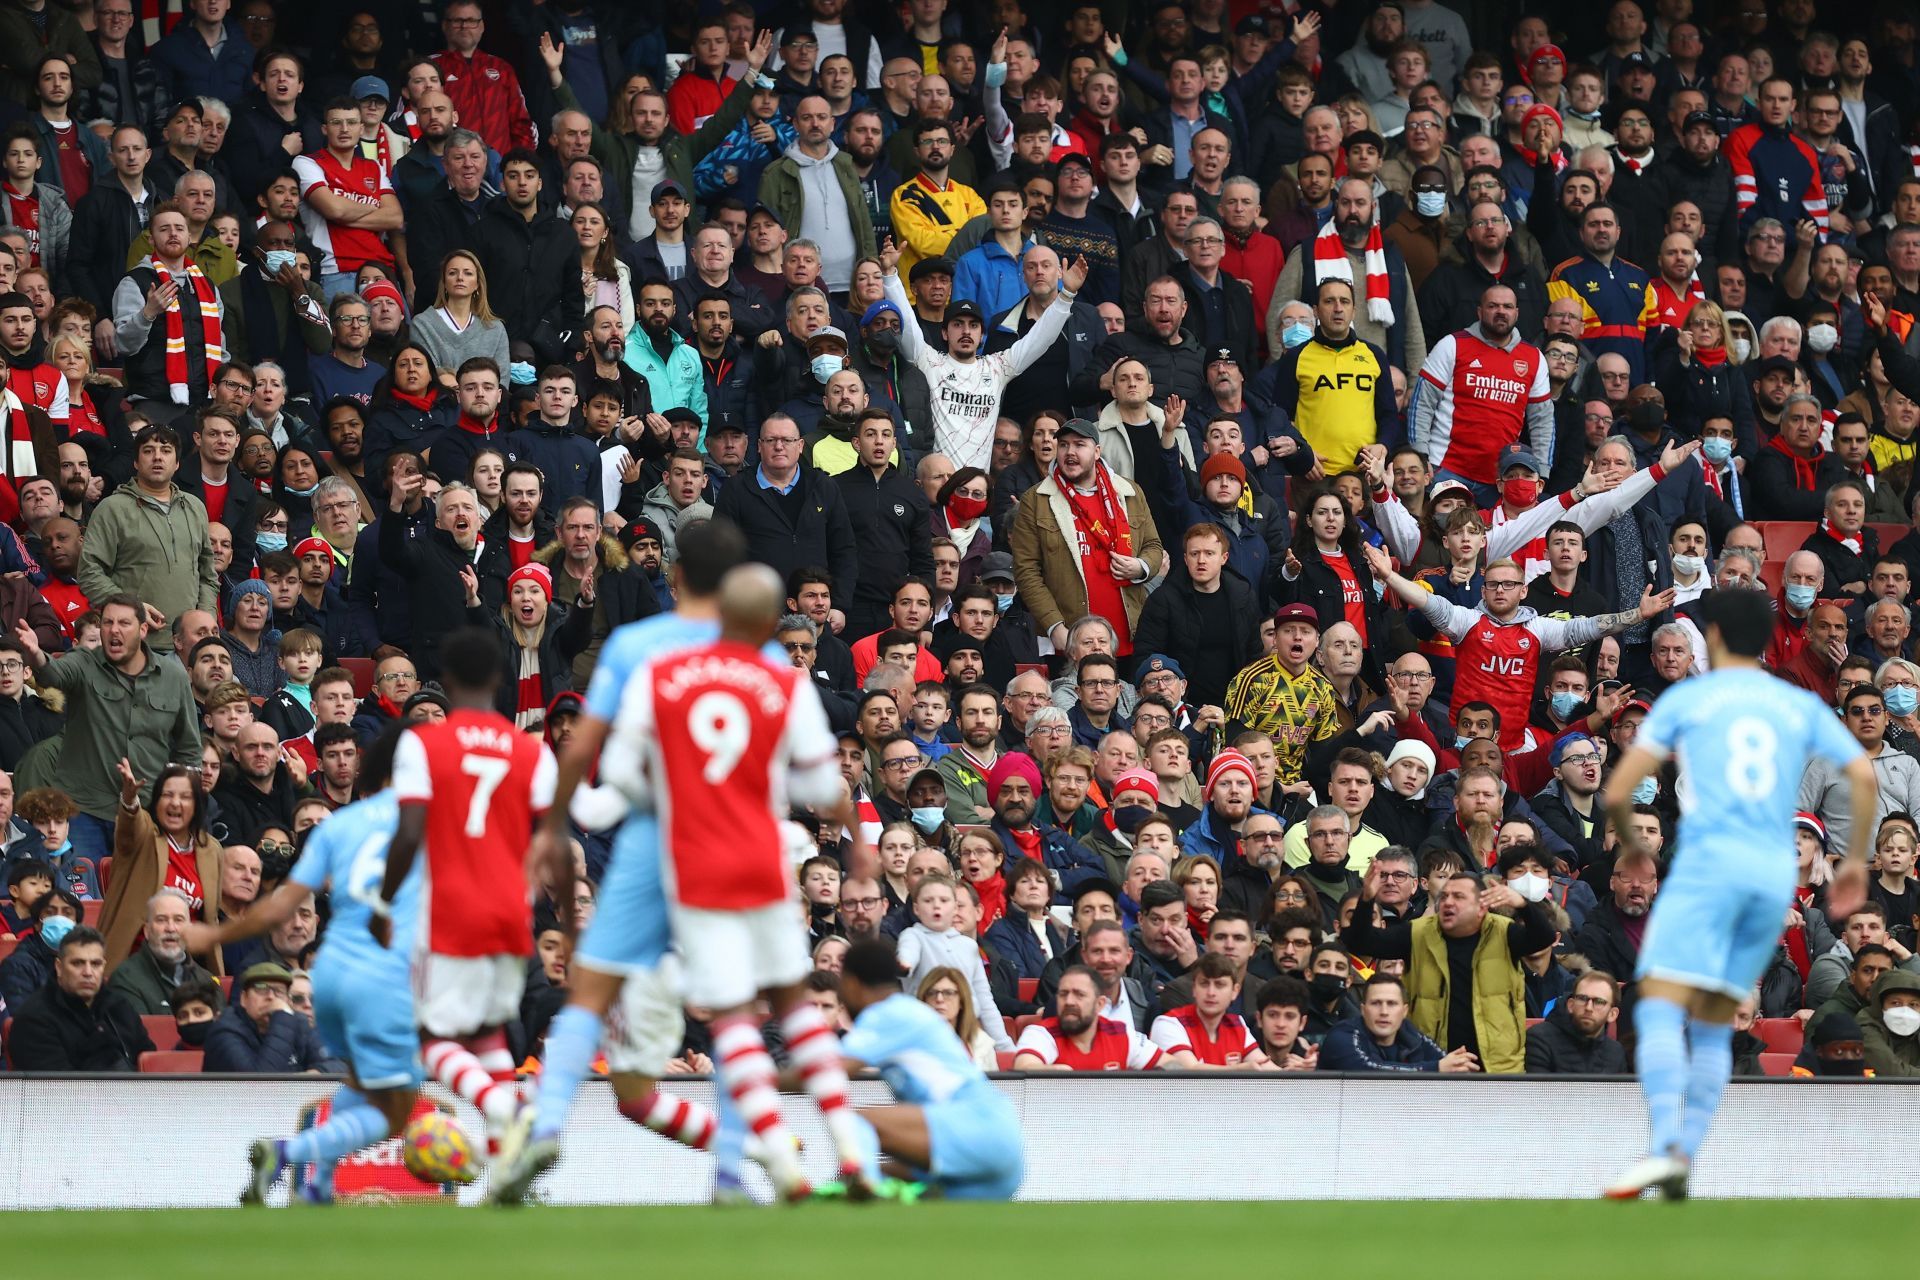 Arsenal fans react to the proceedings versus Manchester City in the Premier League